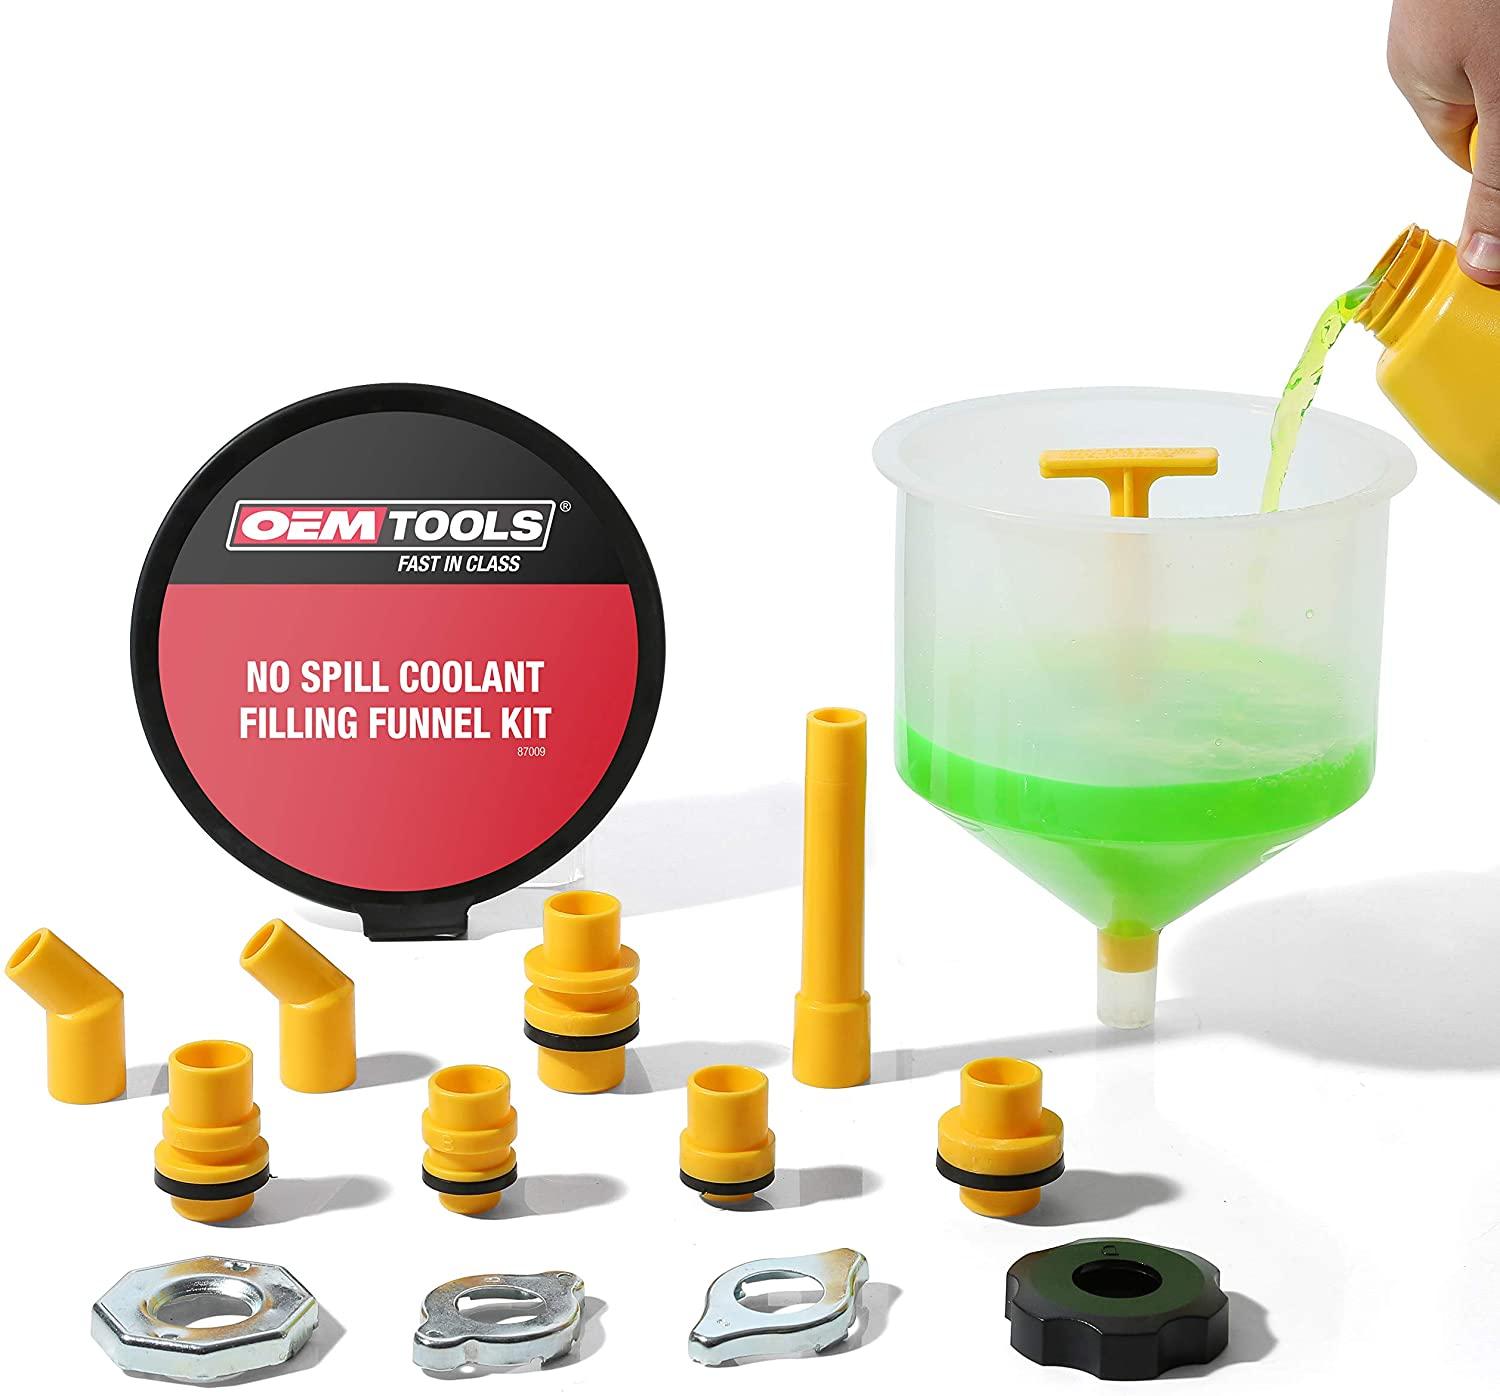 15-Piece No-Spill Coolant Funnel Kit for $13.85